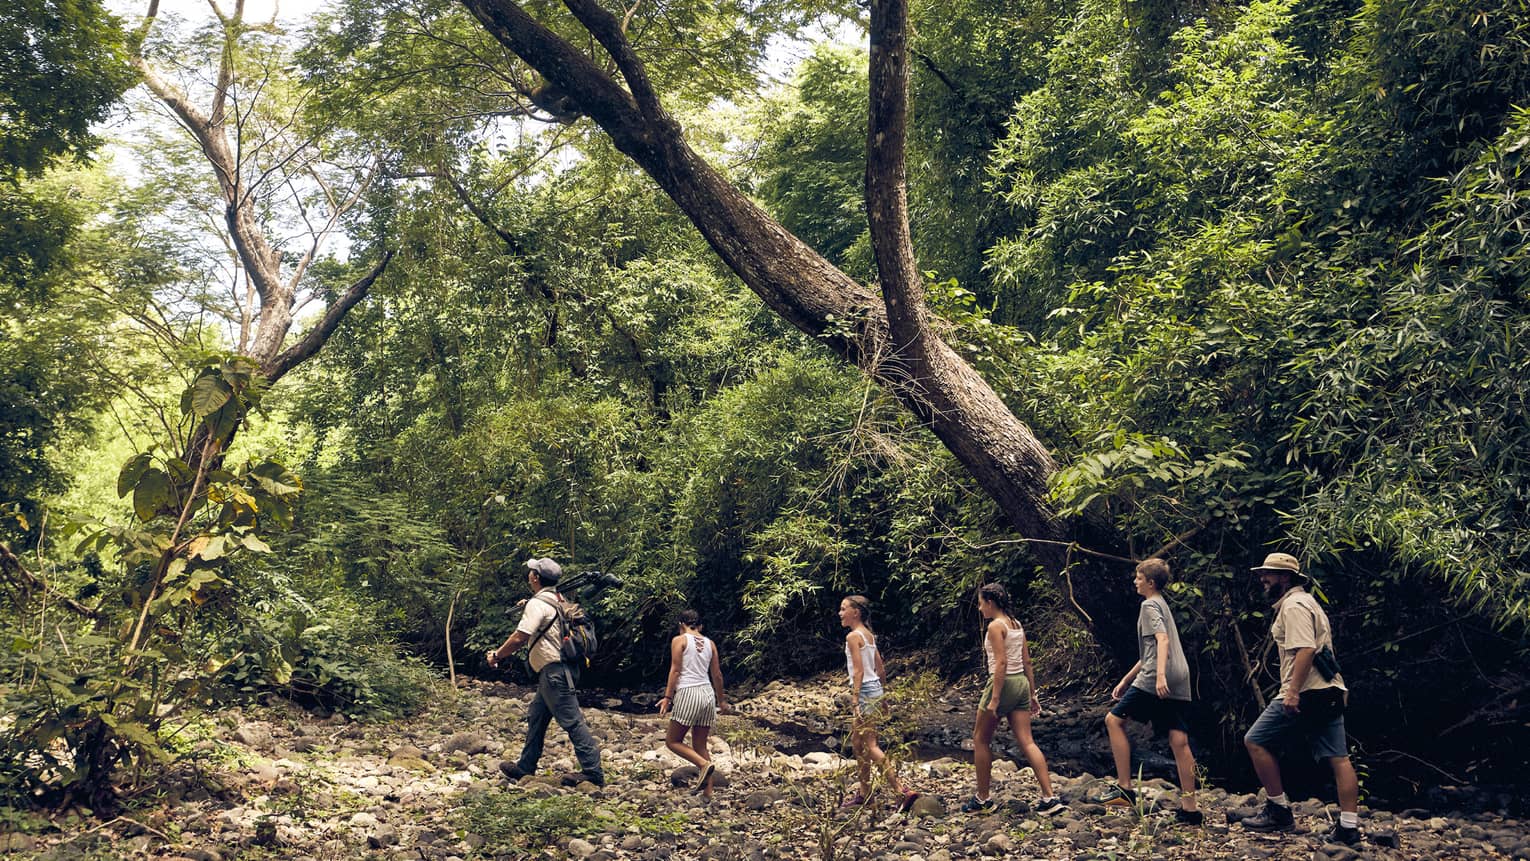 A group of people hiking through a forest.